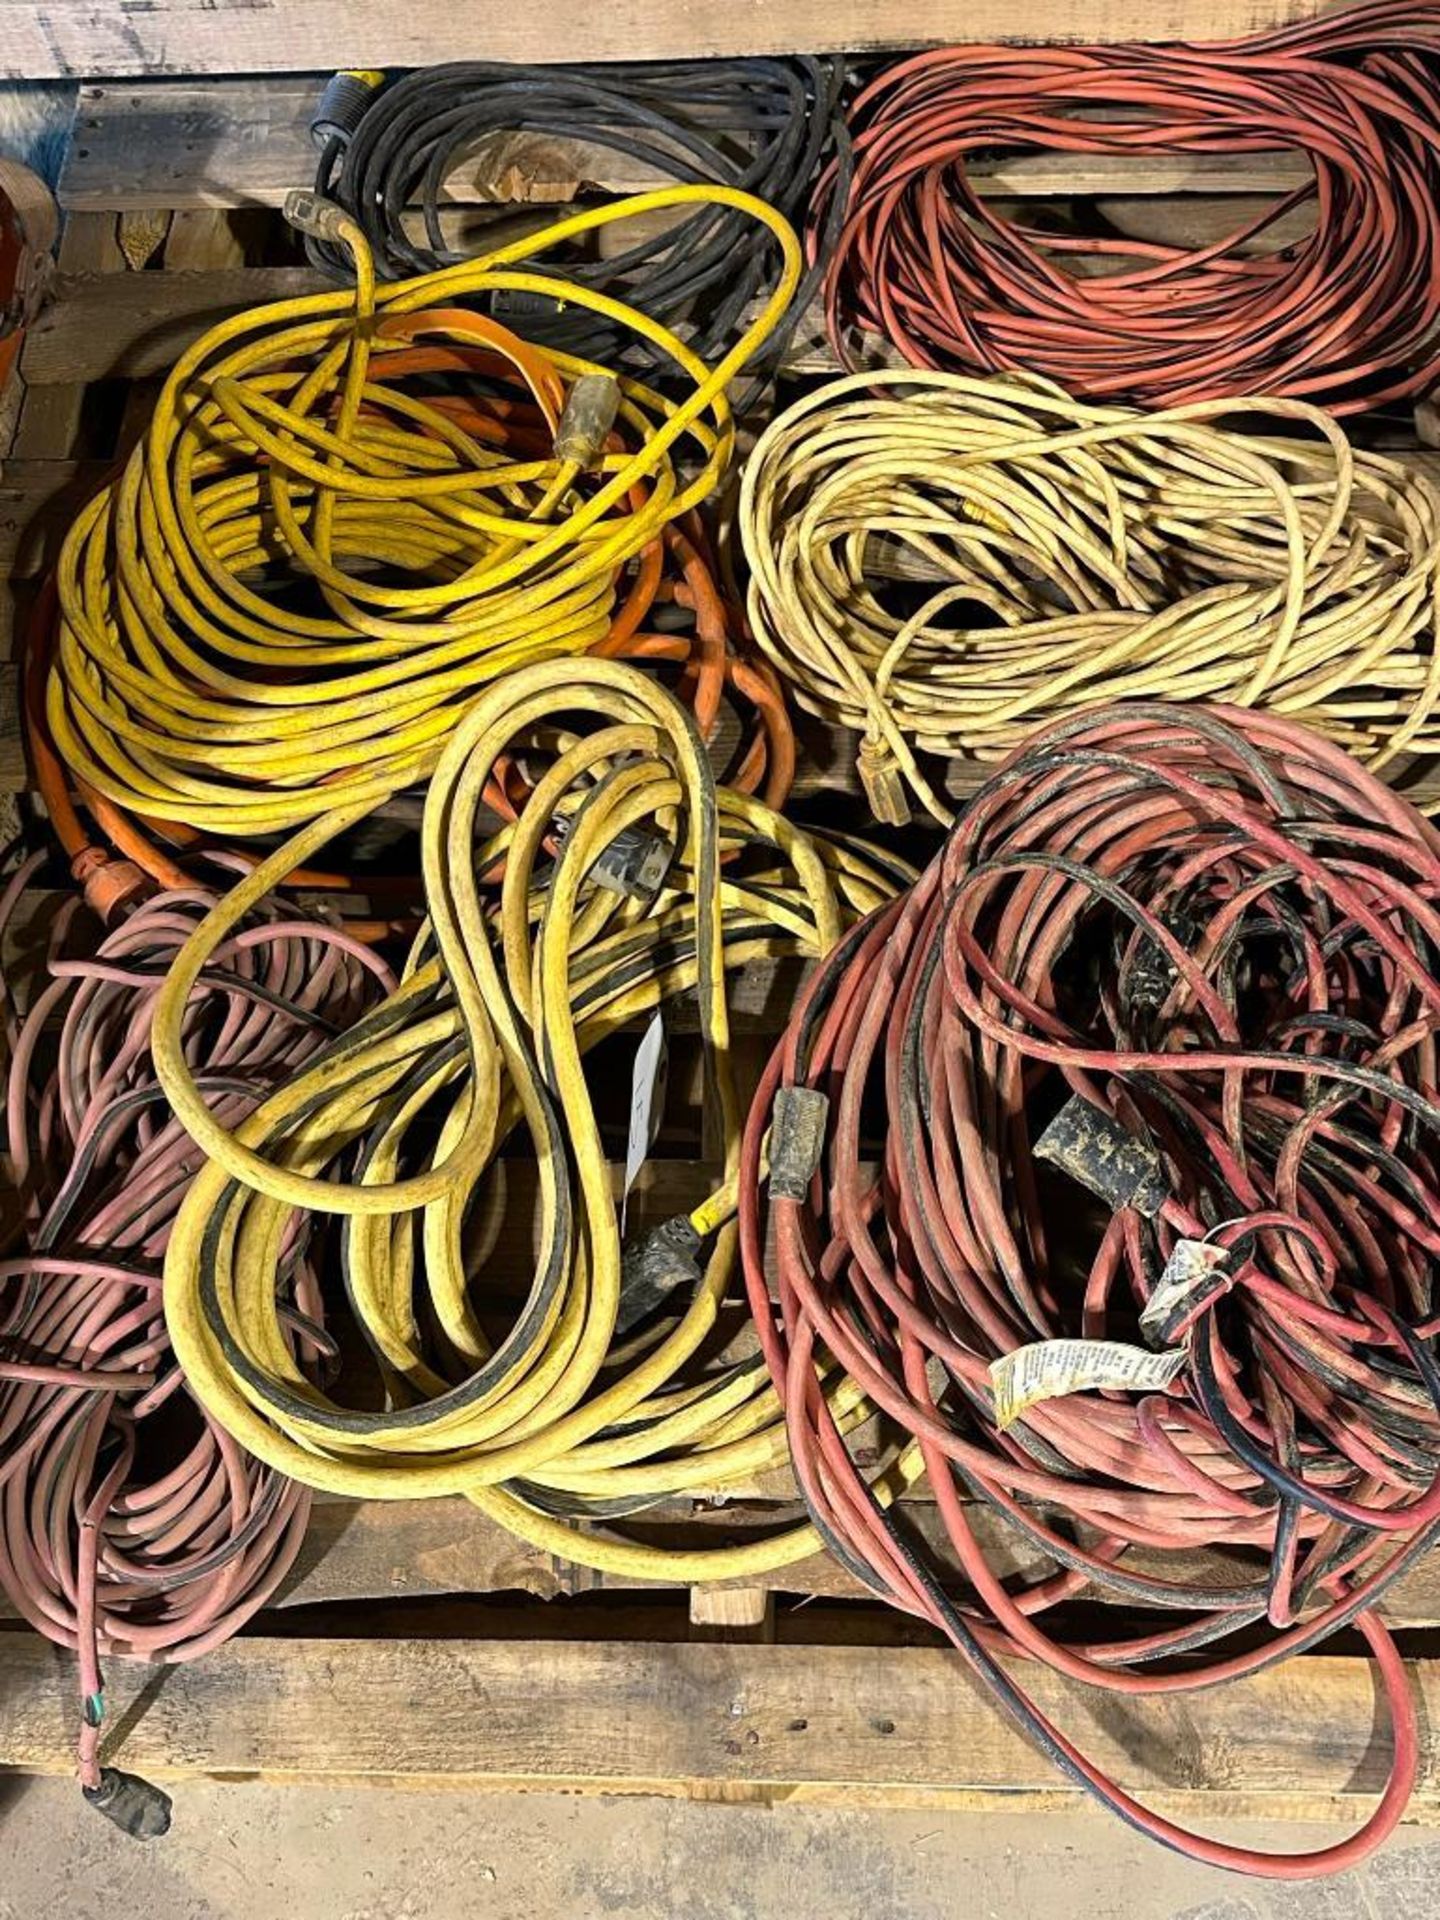 Approximately 9 heavy duty extension cords - Image 2 of 2